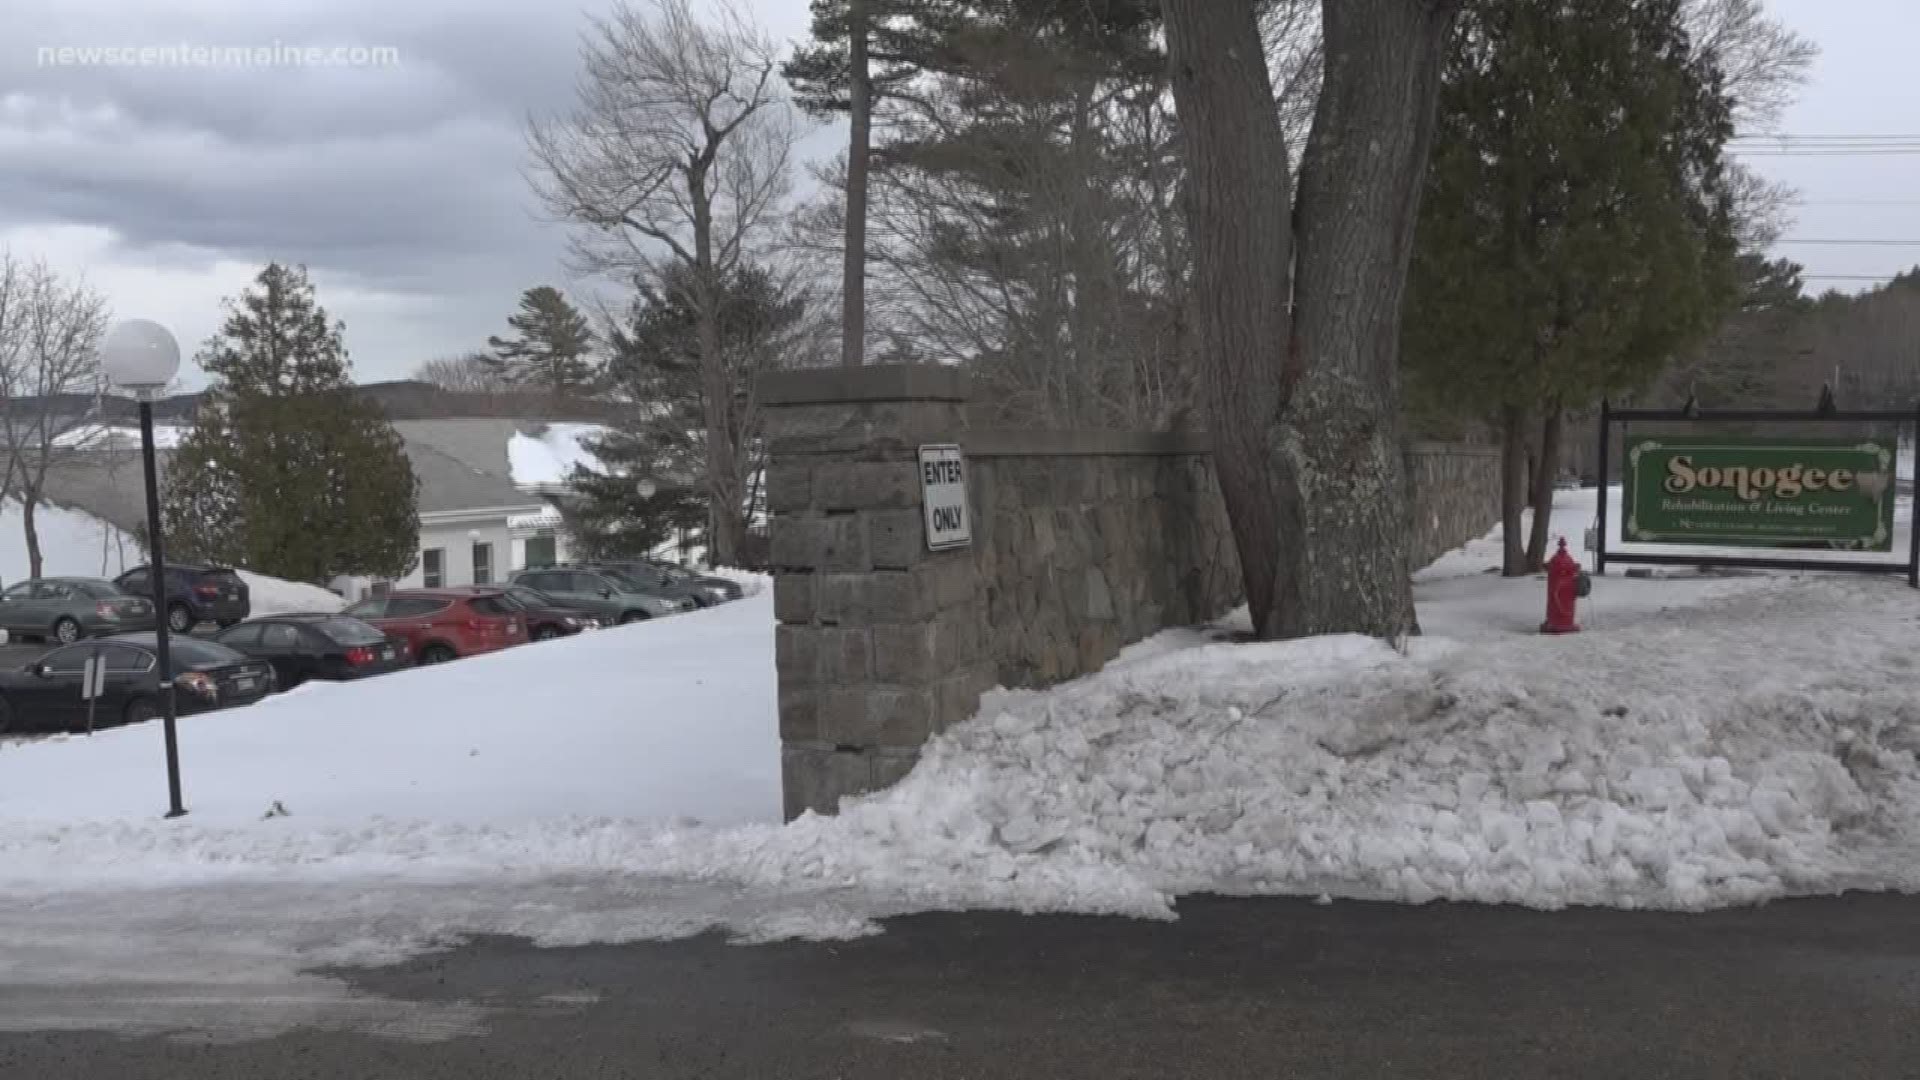 About 50 residents and 60 employees at Sonogee Rehabilitation and Living Center in Bar Harbor are being displaced as the nursing home closes.